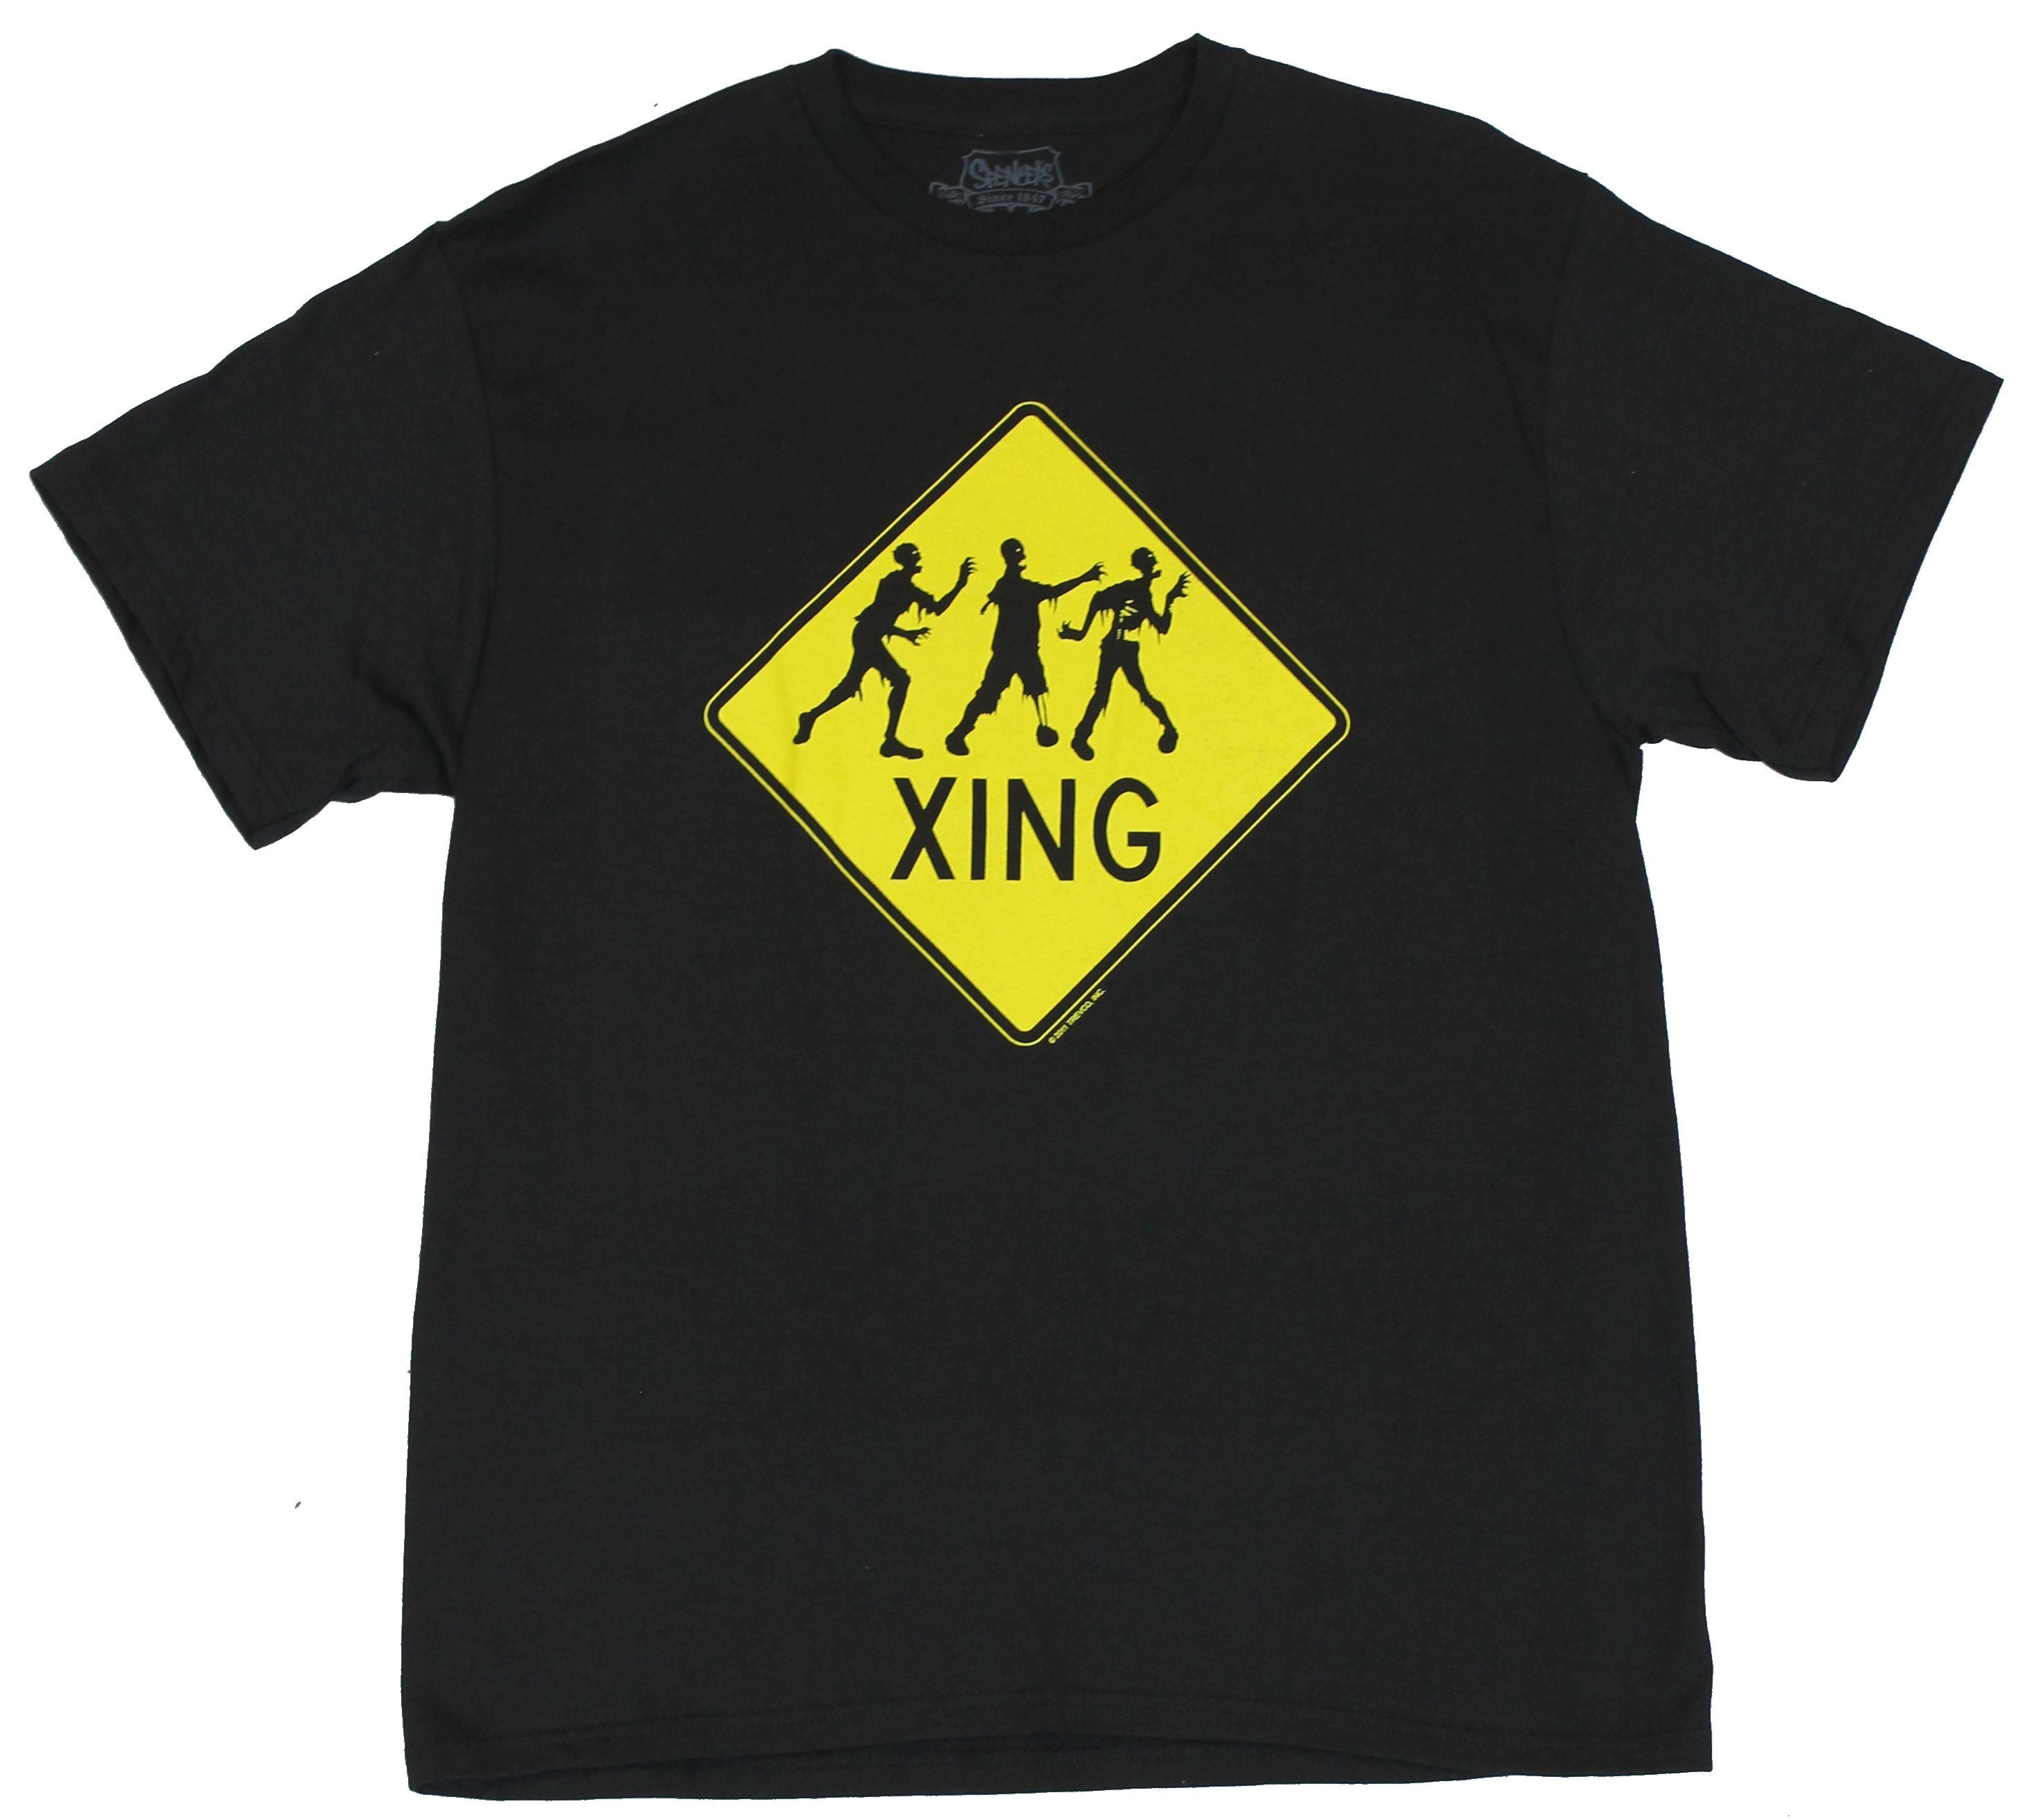 Zombie Mens T-Shirt - Zombie Xing Crossing Warning Sign Image